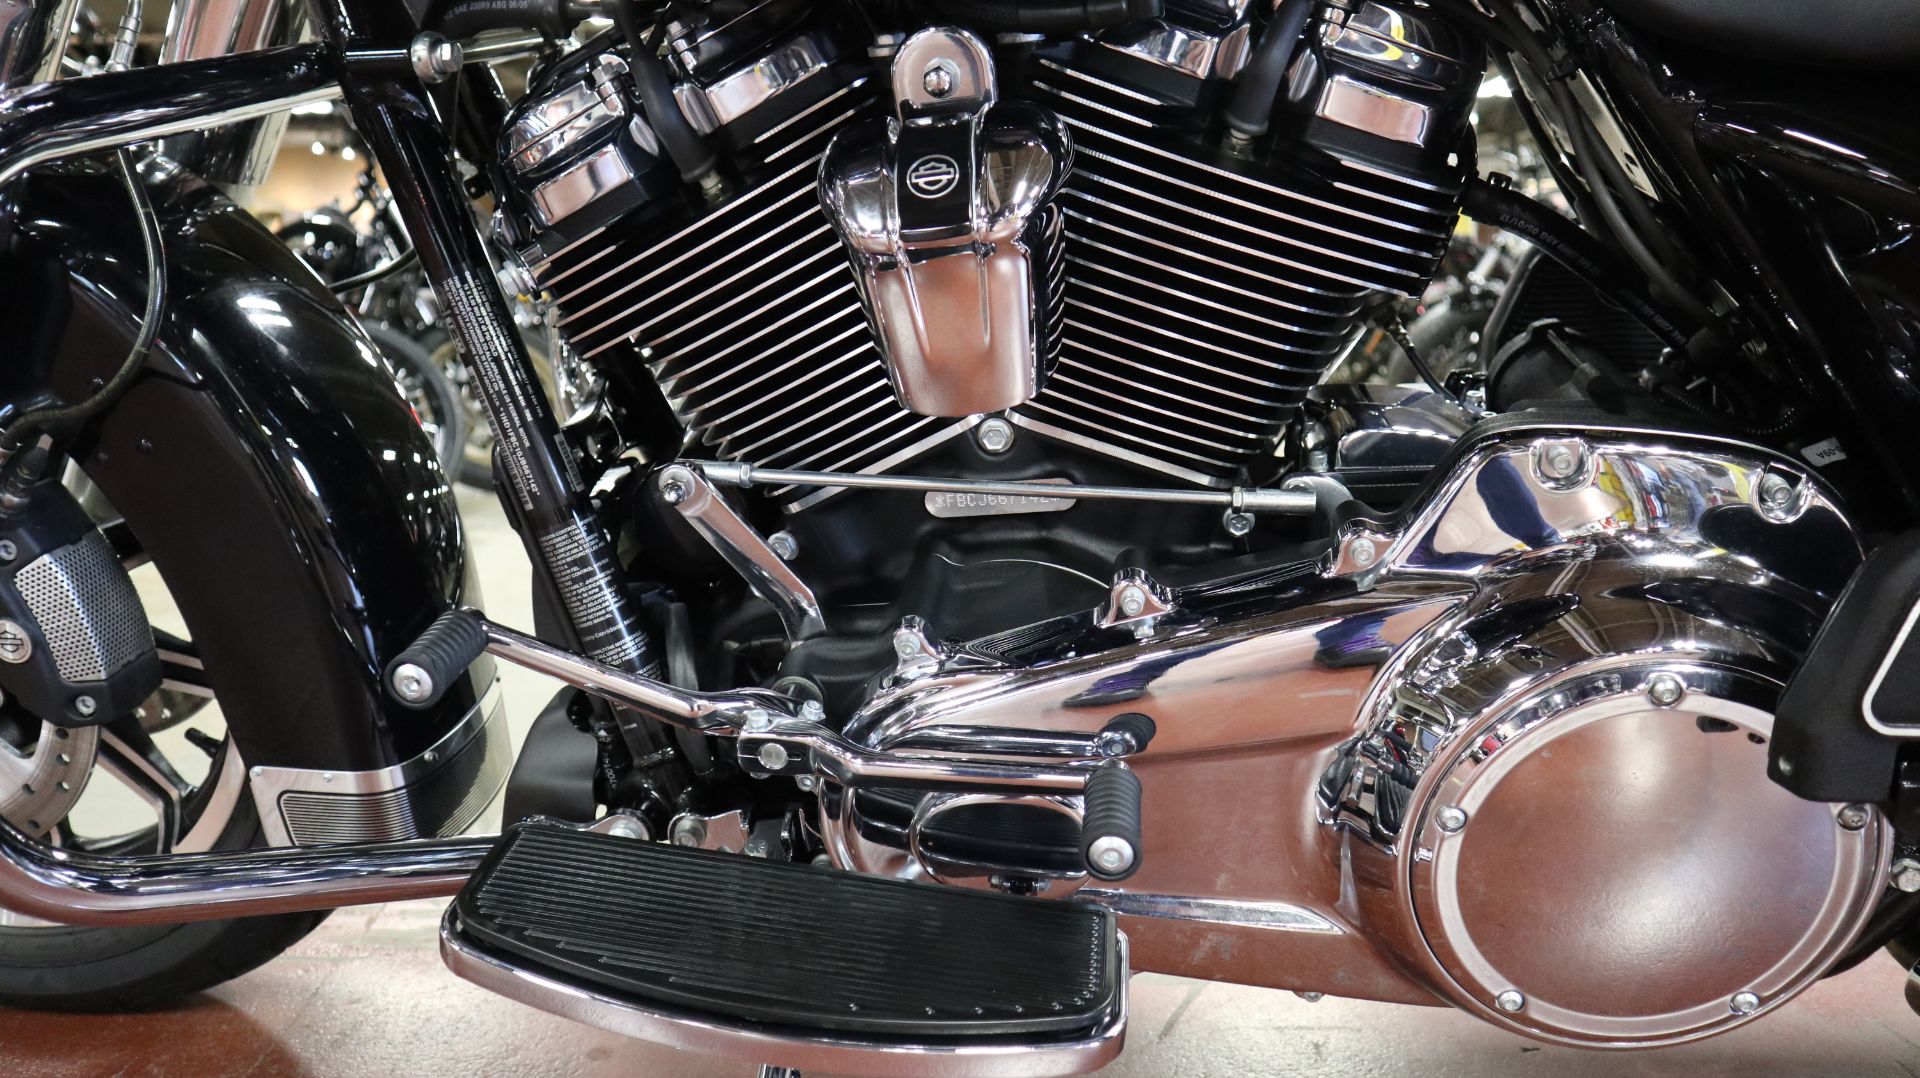 2018 Harley-Davidson Road King® in New London, Connecticut - Photo 19